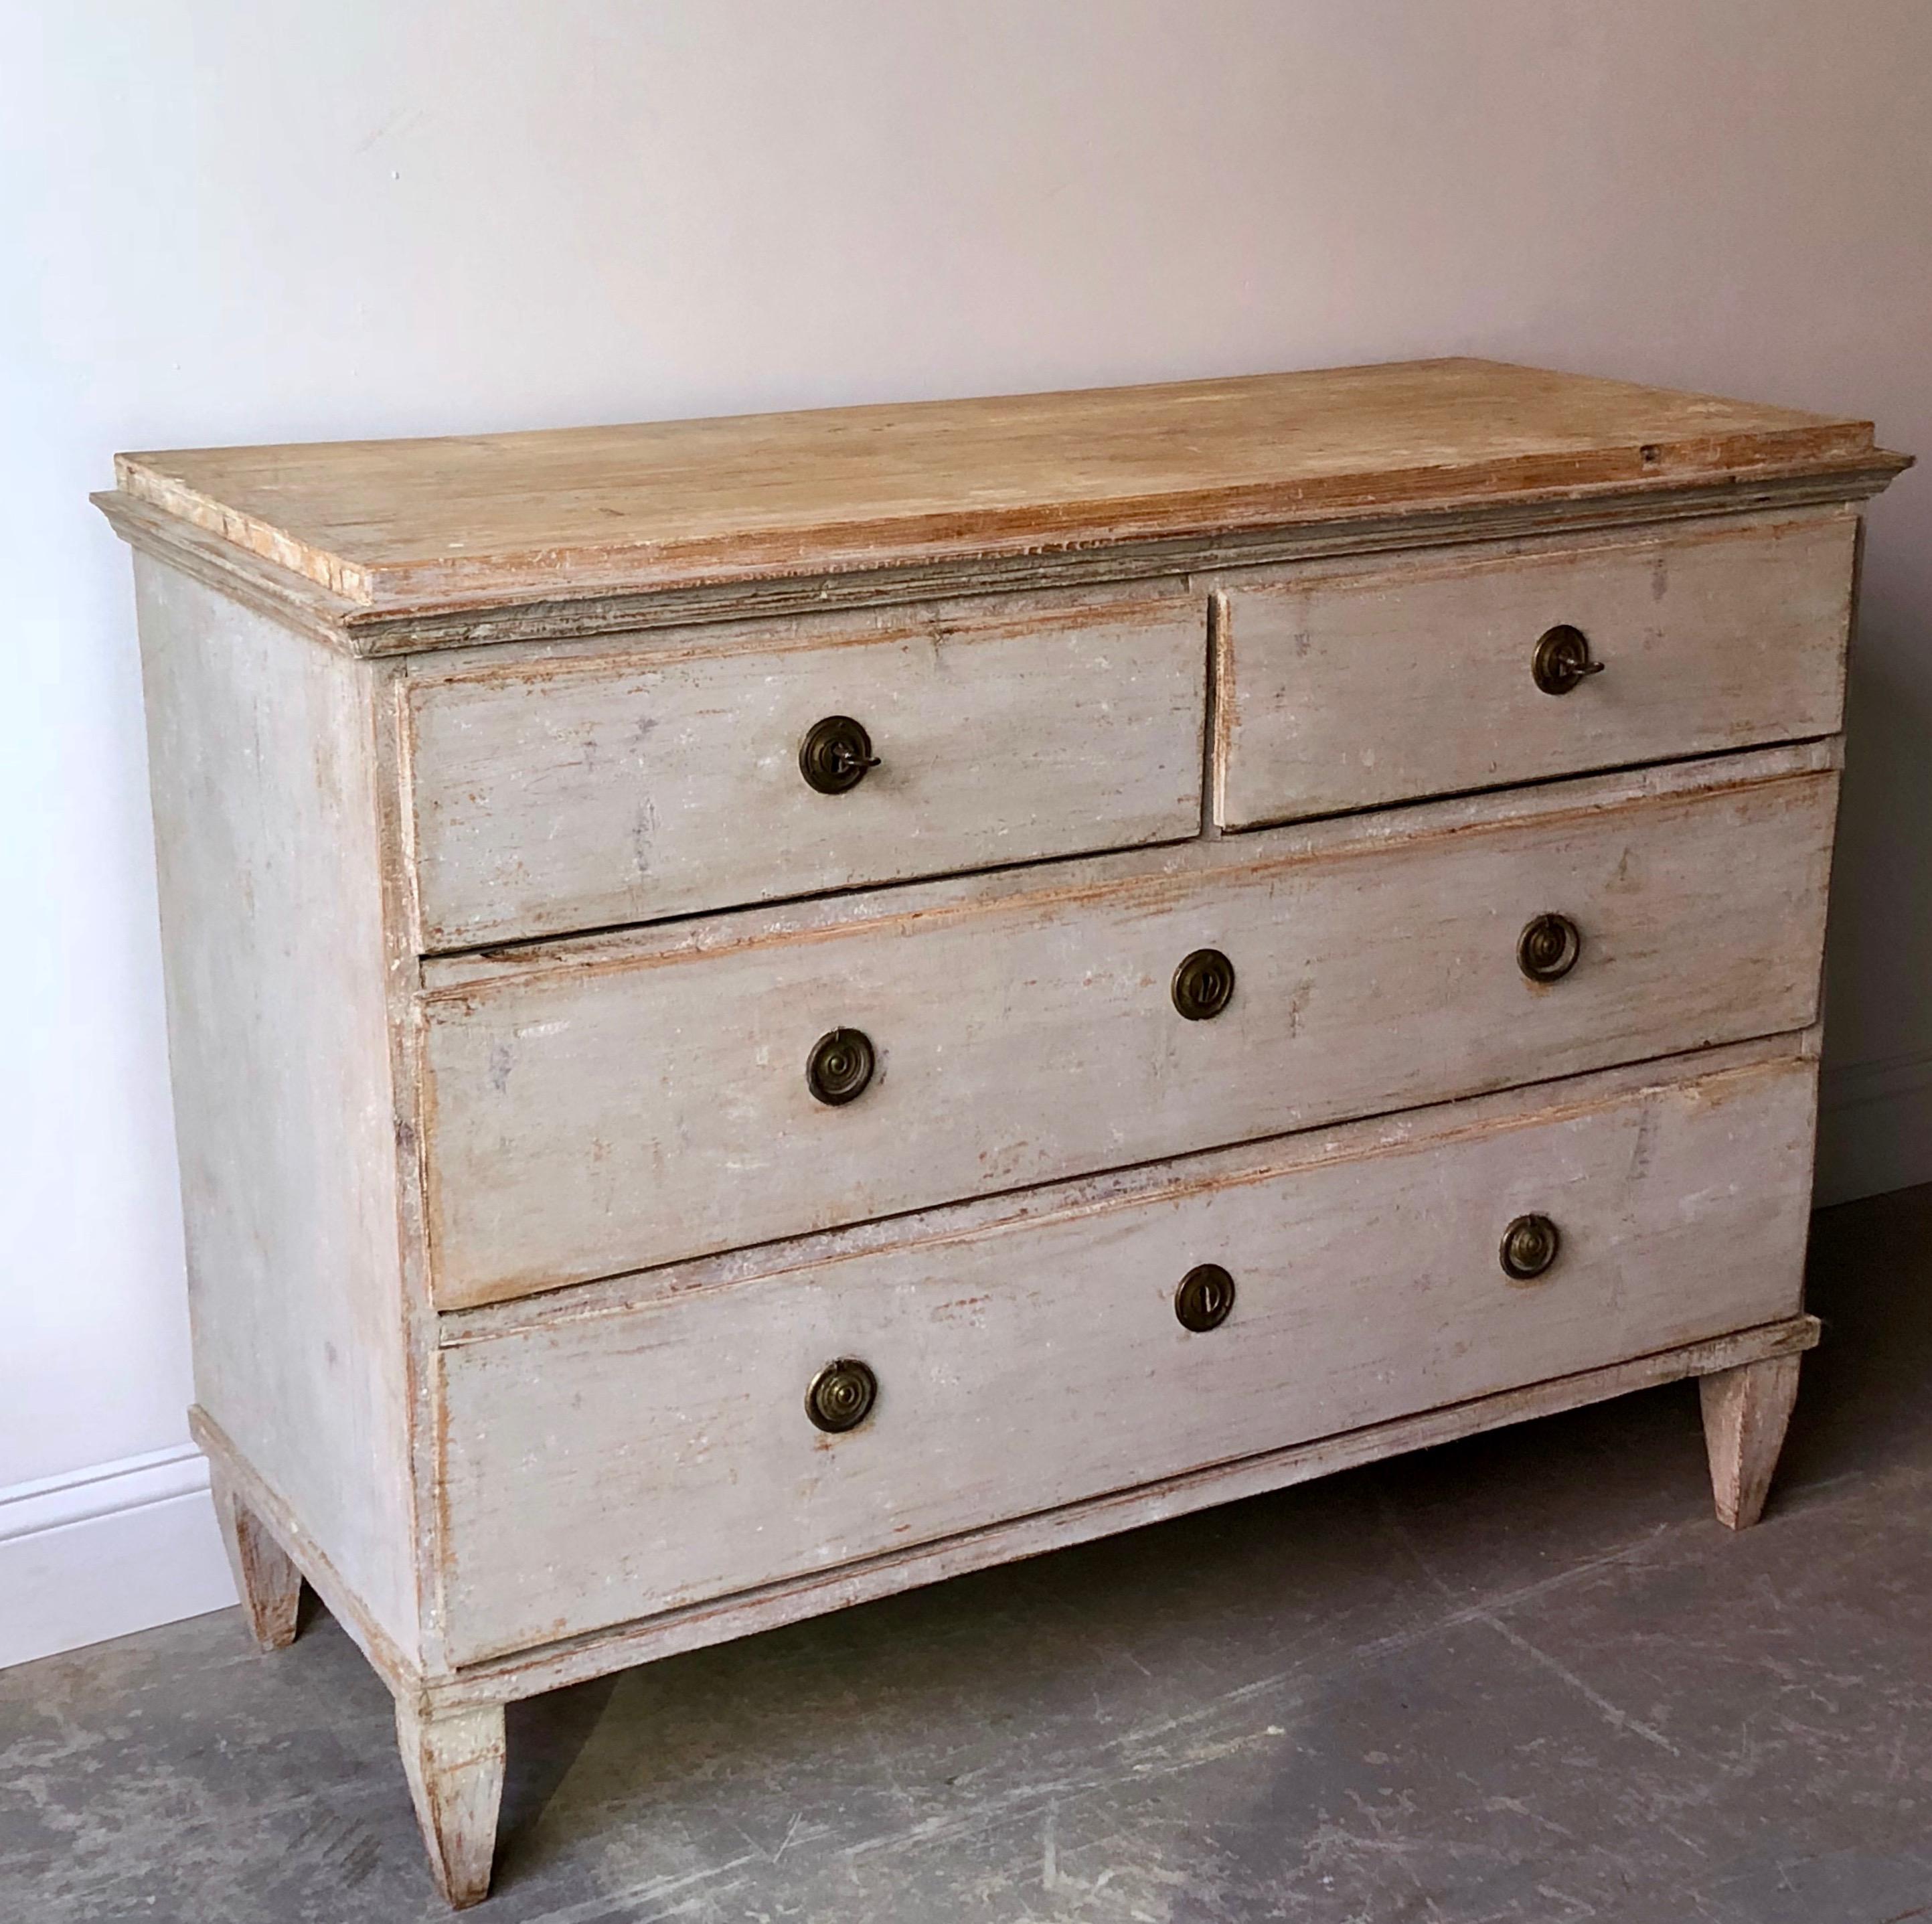 A handsome Swedish Gustavian period chest of drawers with original hardware in original wonderful worn patina. 
Stockholm, Sweden, 1800-1810.
Here are few examples, surprising pieces and objects, authentic, decorative and rare items that you will